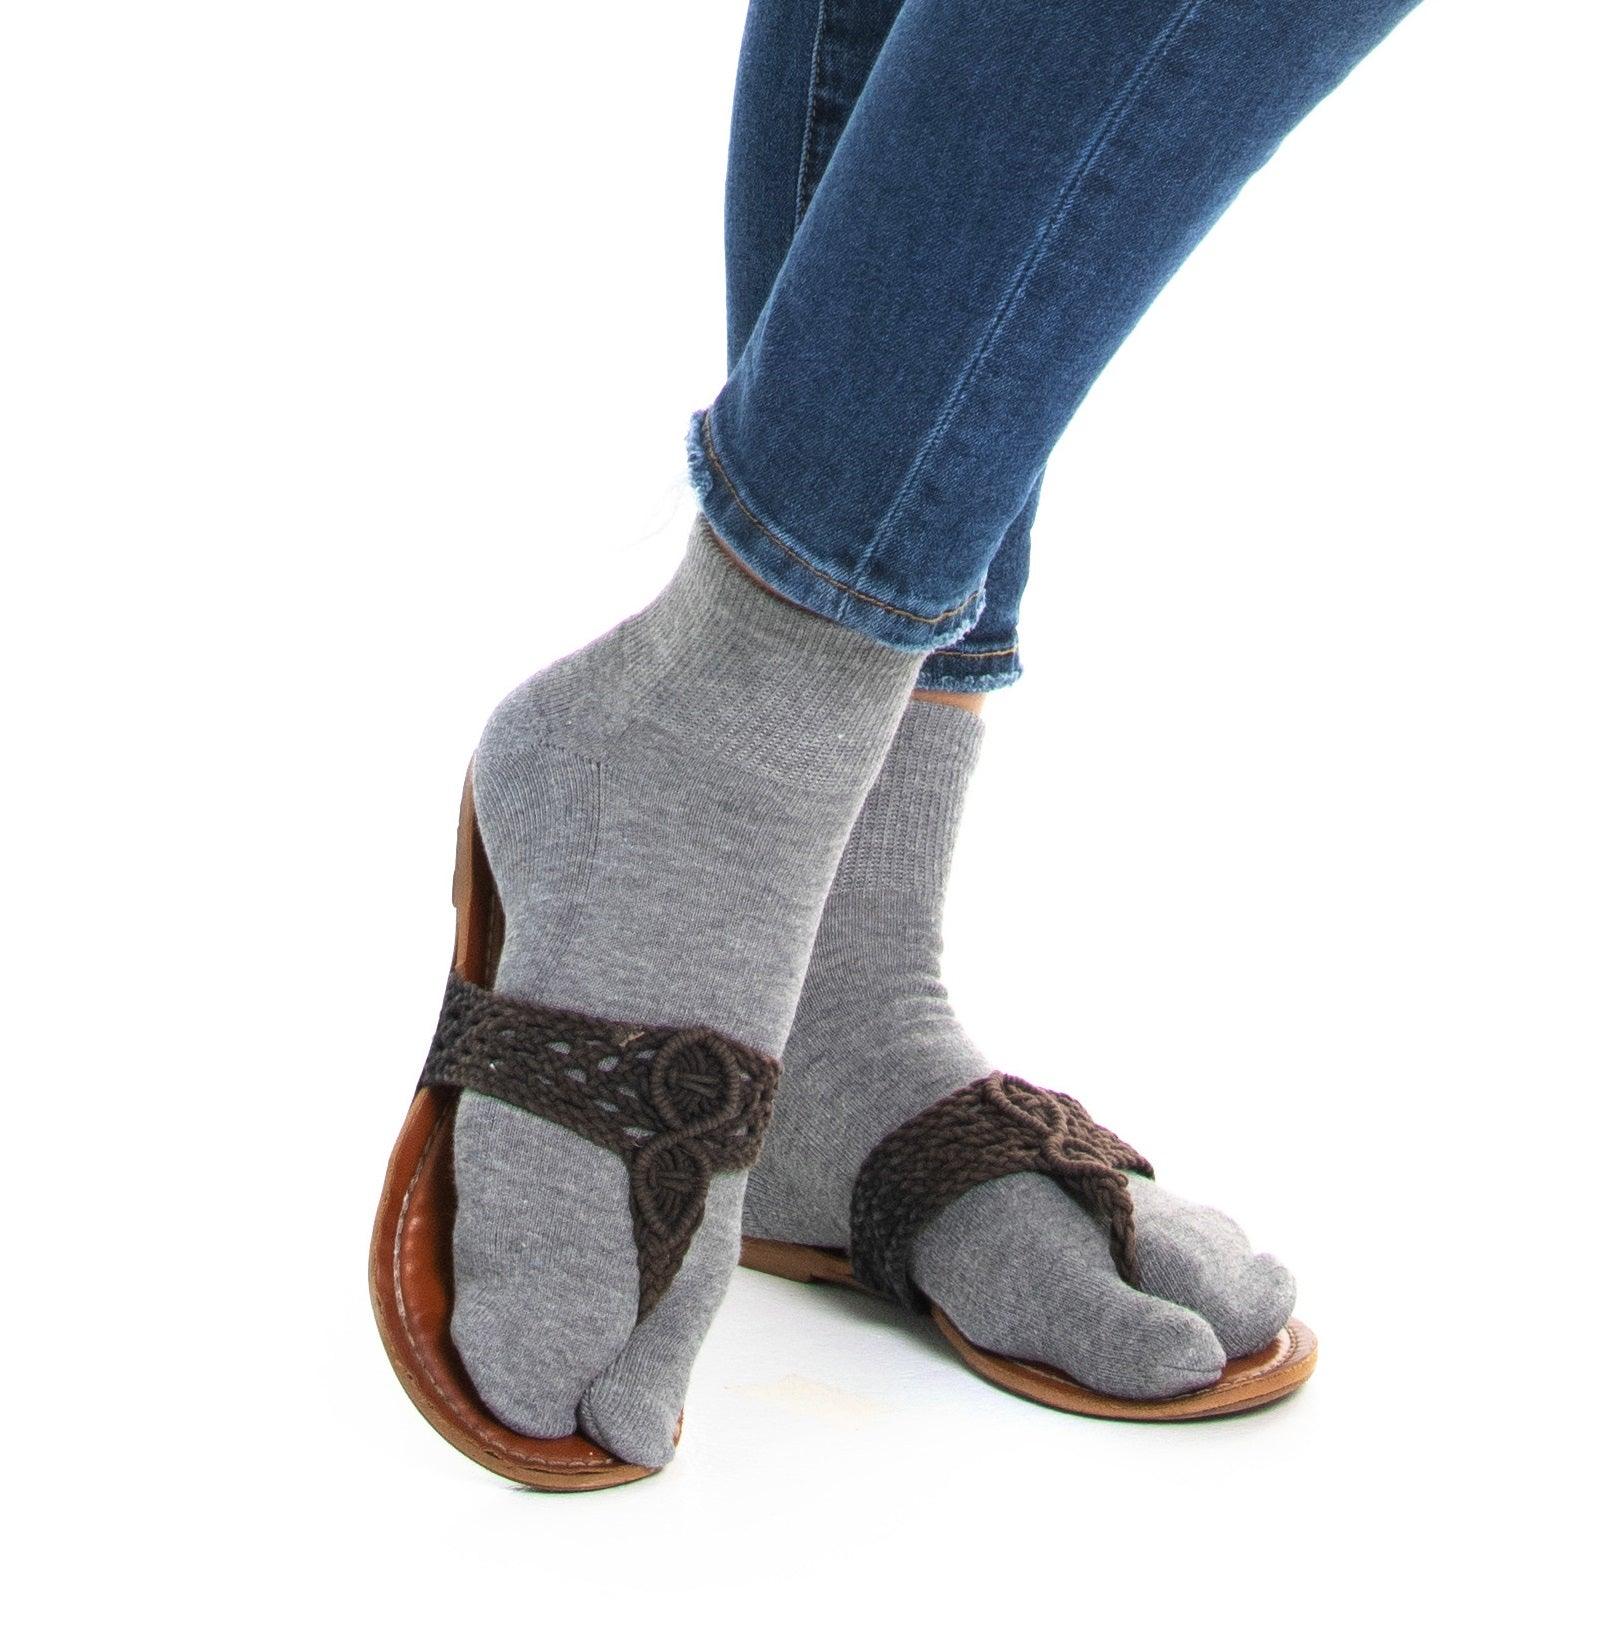 Thicker V-Toe Athletic or Casual Grey Flip-Flop Tabi Socks Cotton Blend Comfortable Stylish - Ankle Socks by V-Toe Socks, Inc - The Hammer Sports